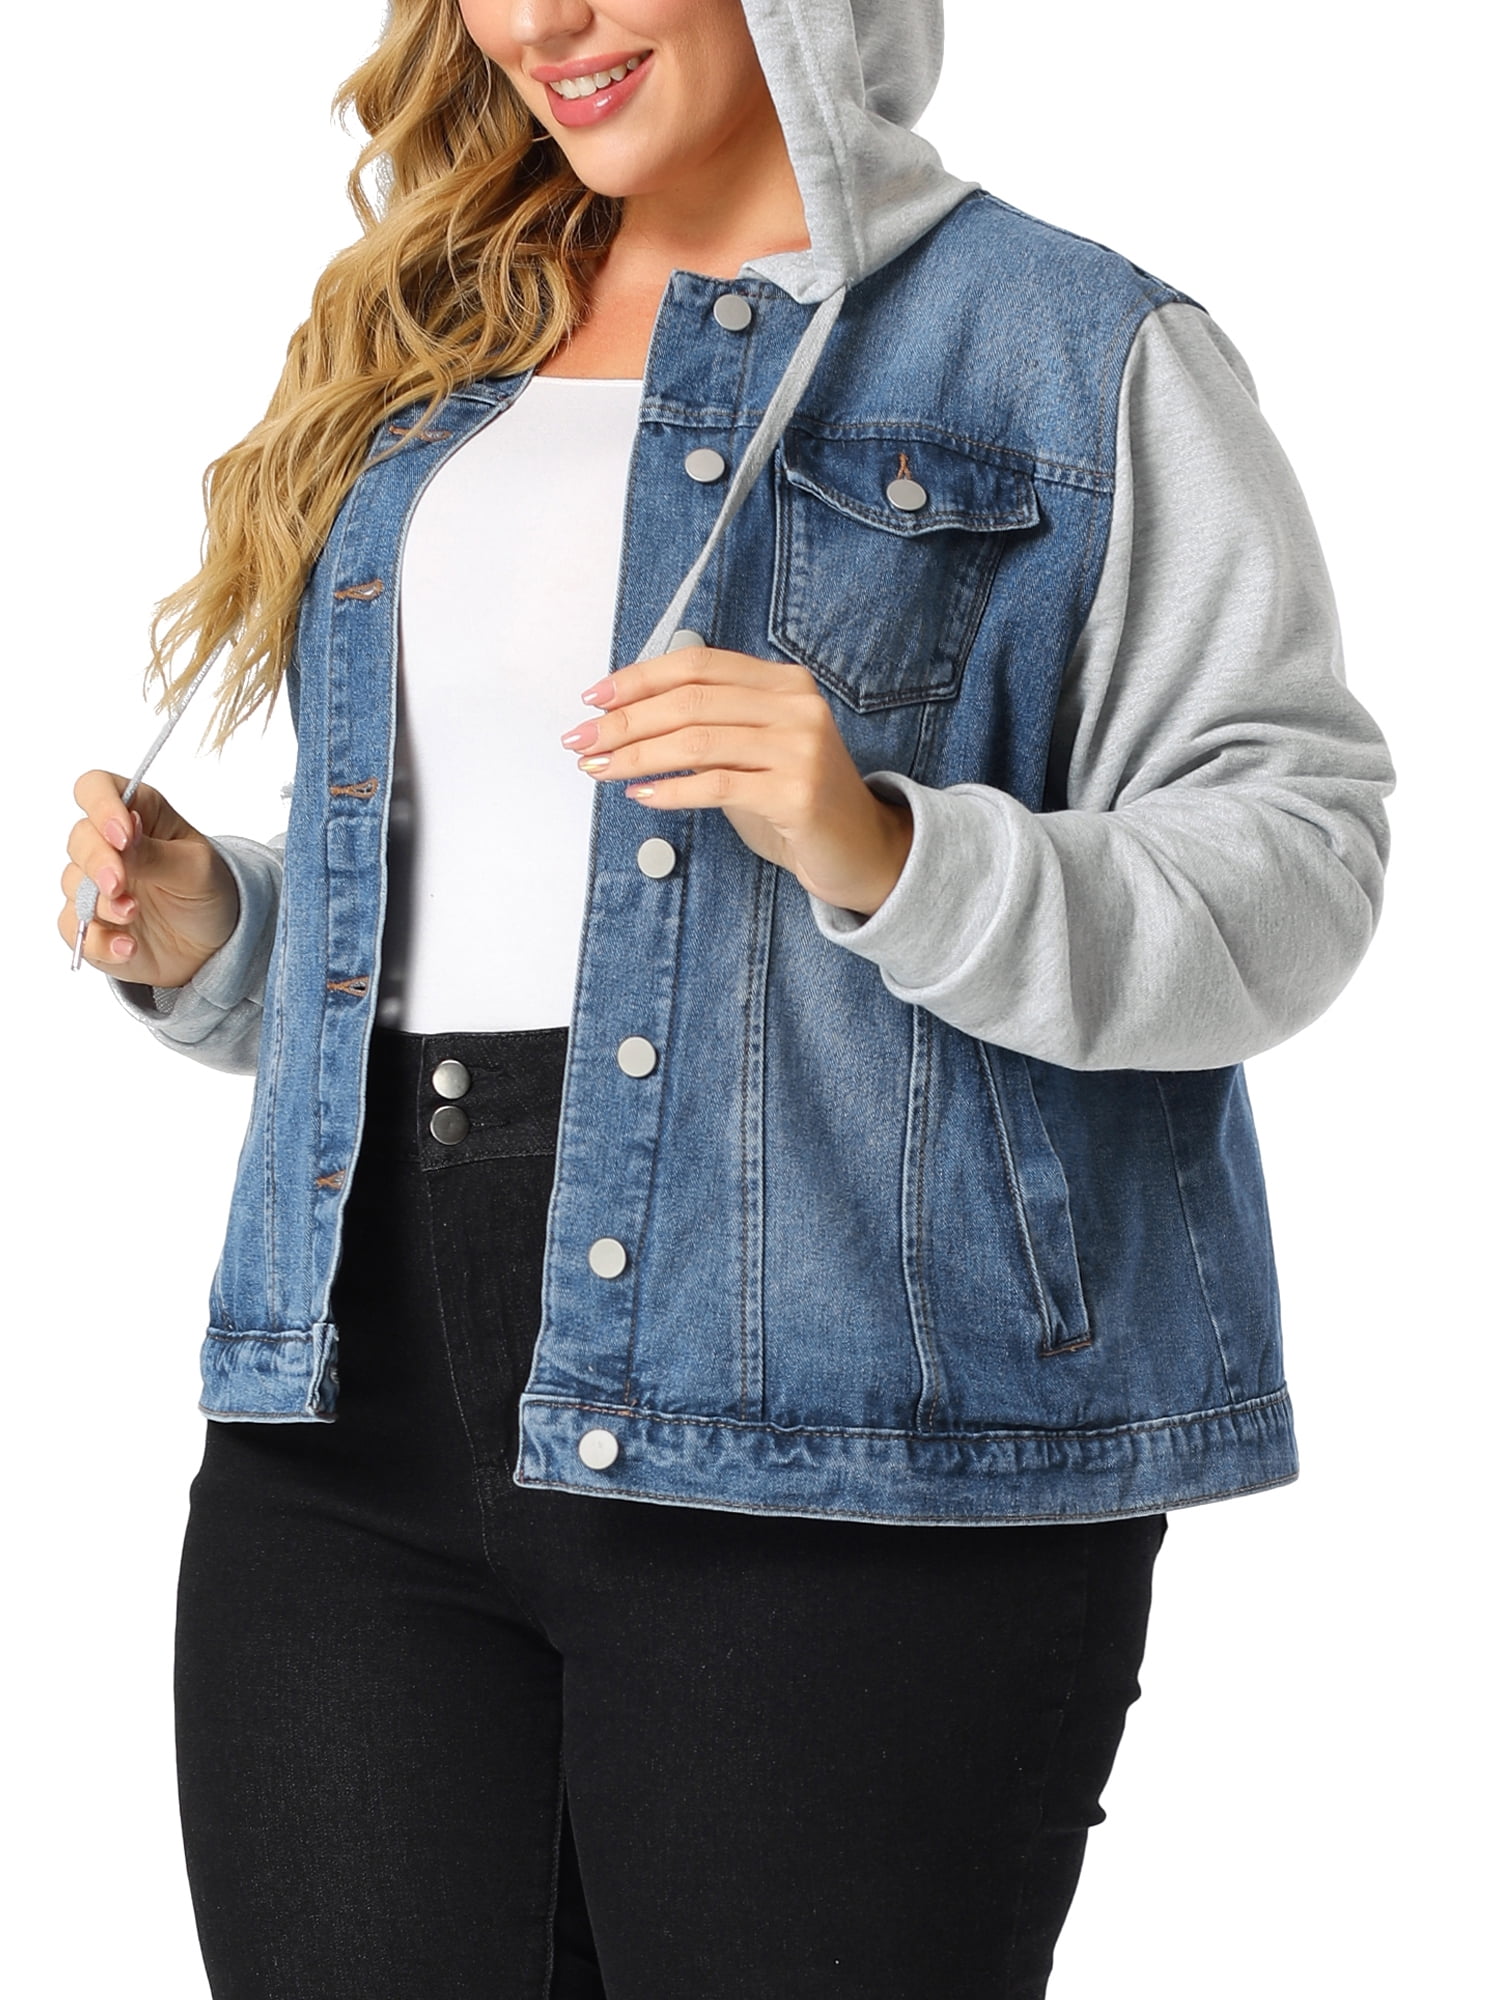 Buy certainPL Women's Layered Drawstring Hood Denim Jacket, Plus Size S-5XL  Slim Fit Jean Jean Jacket Women's Frayed Washed Button Up Cropped Denim  Jacket with 2 Side Pockets at Amazon.in